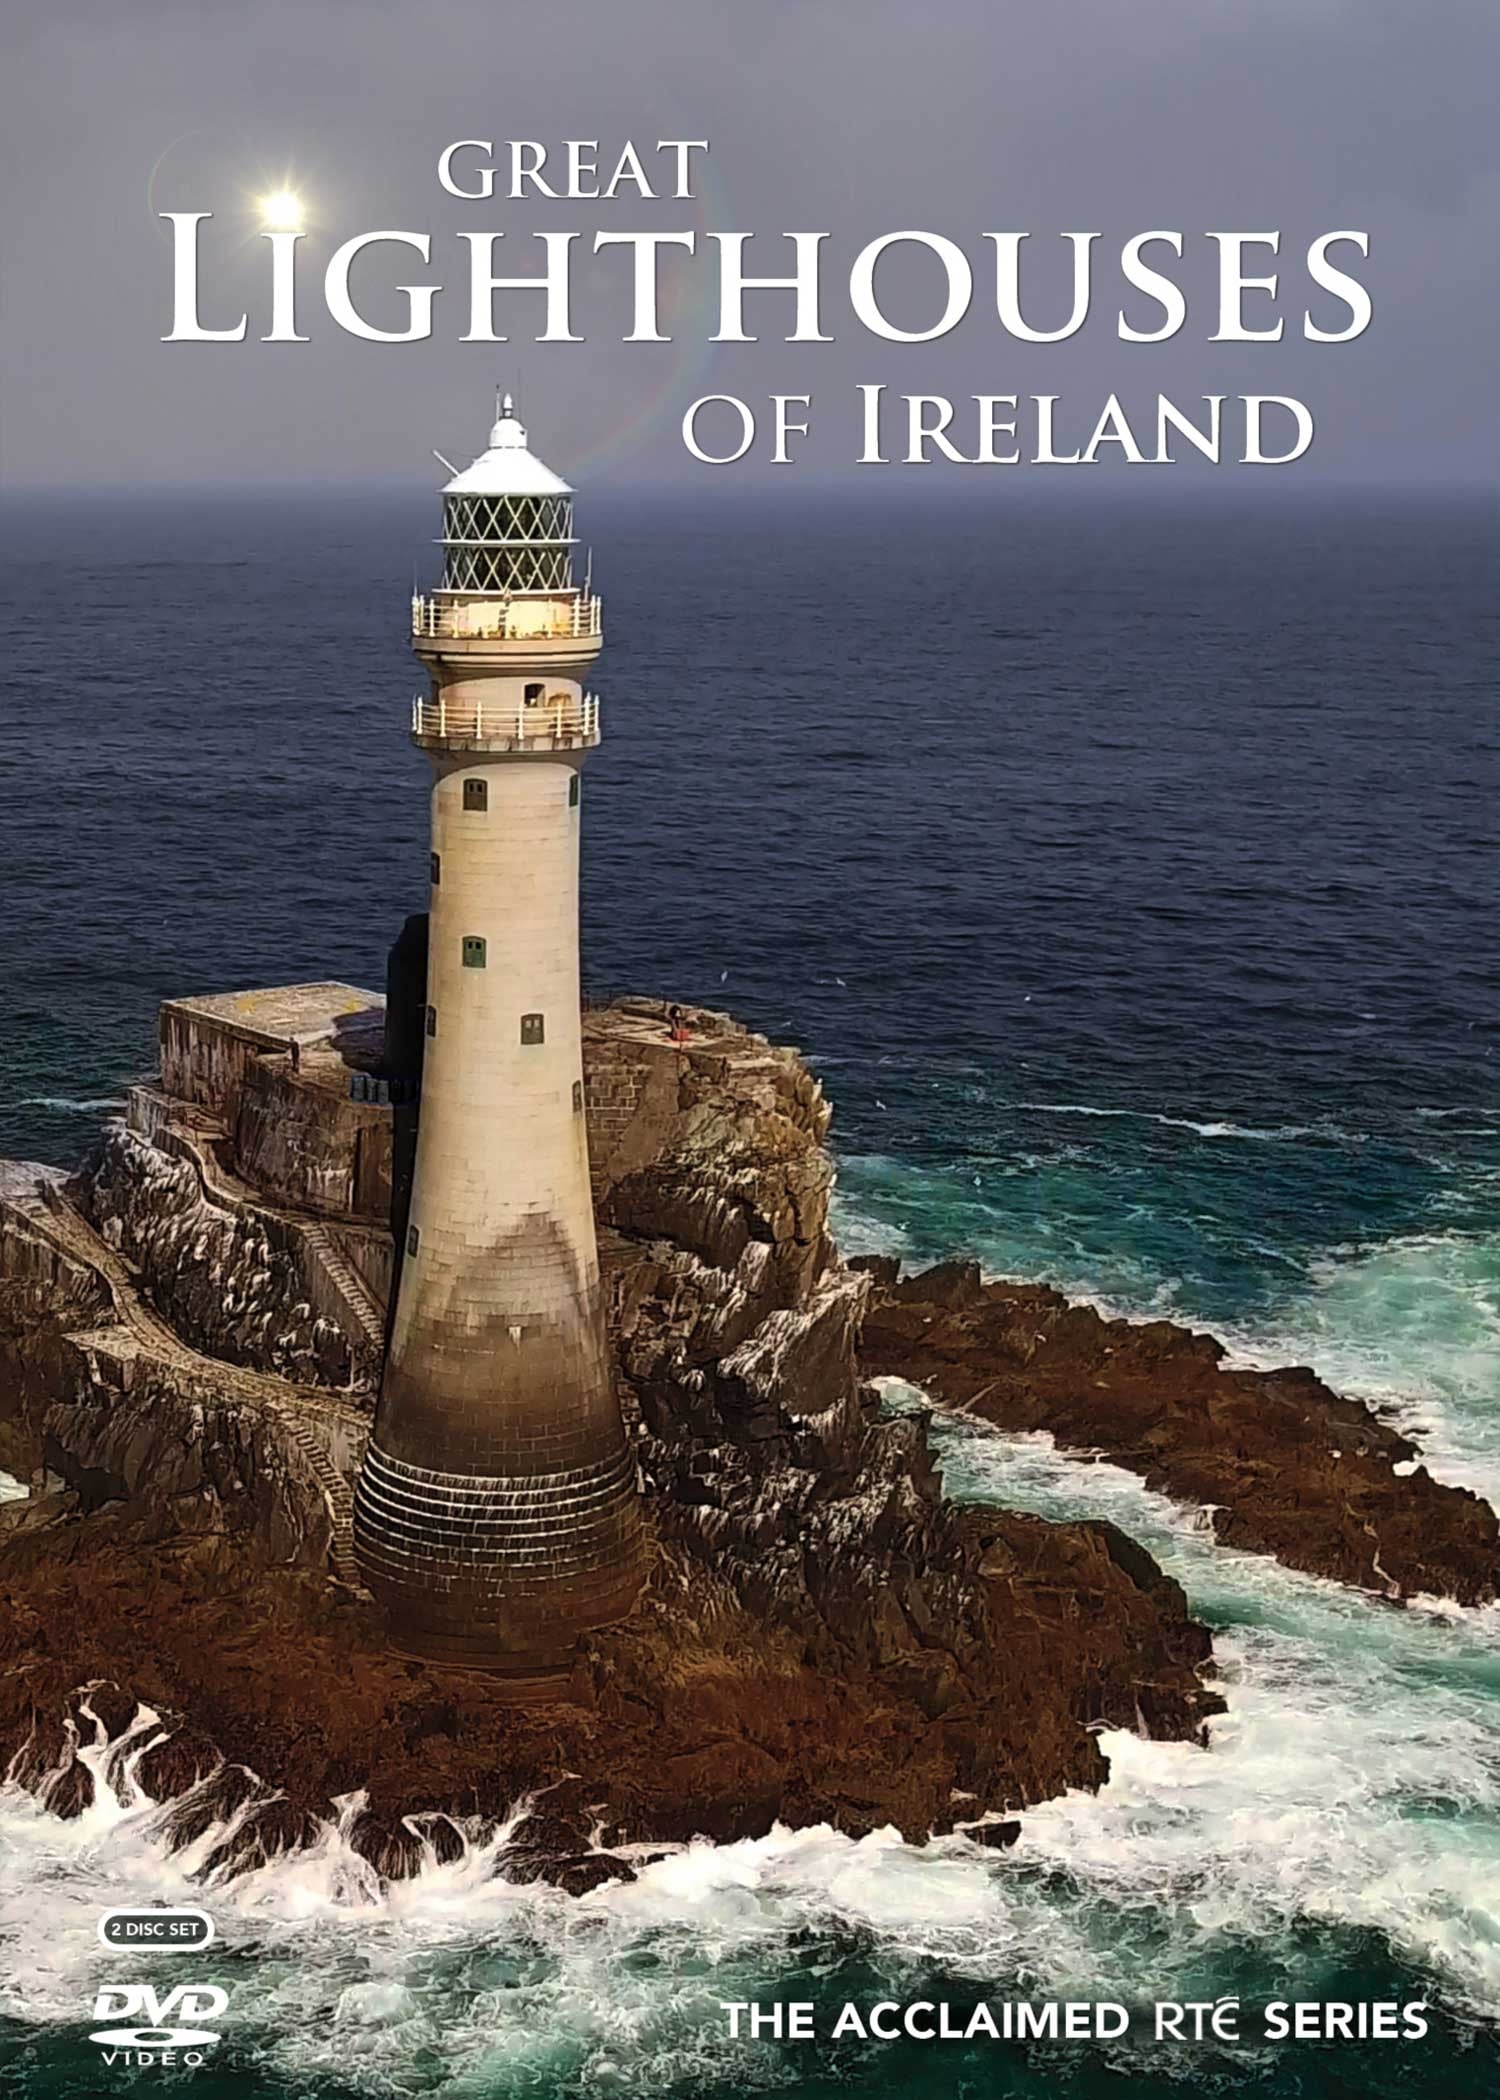 Great Lighthouses of Ireland TV Shows About Ireland